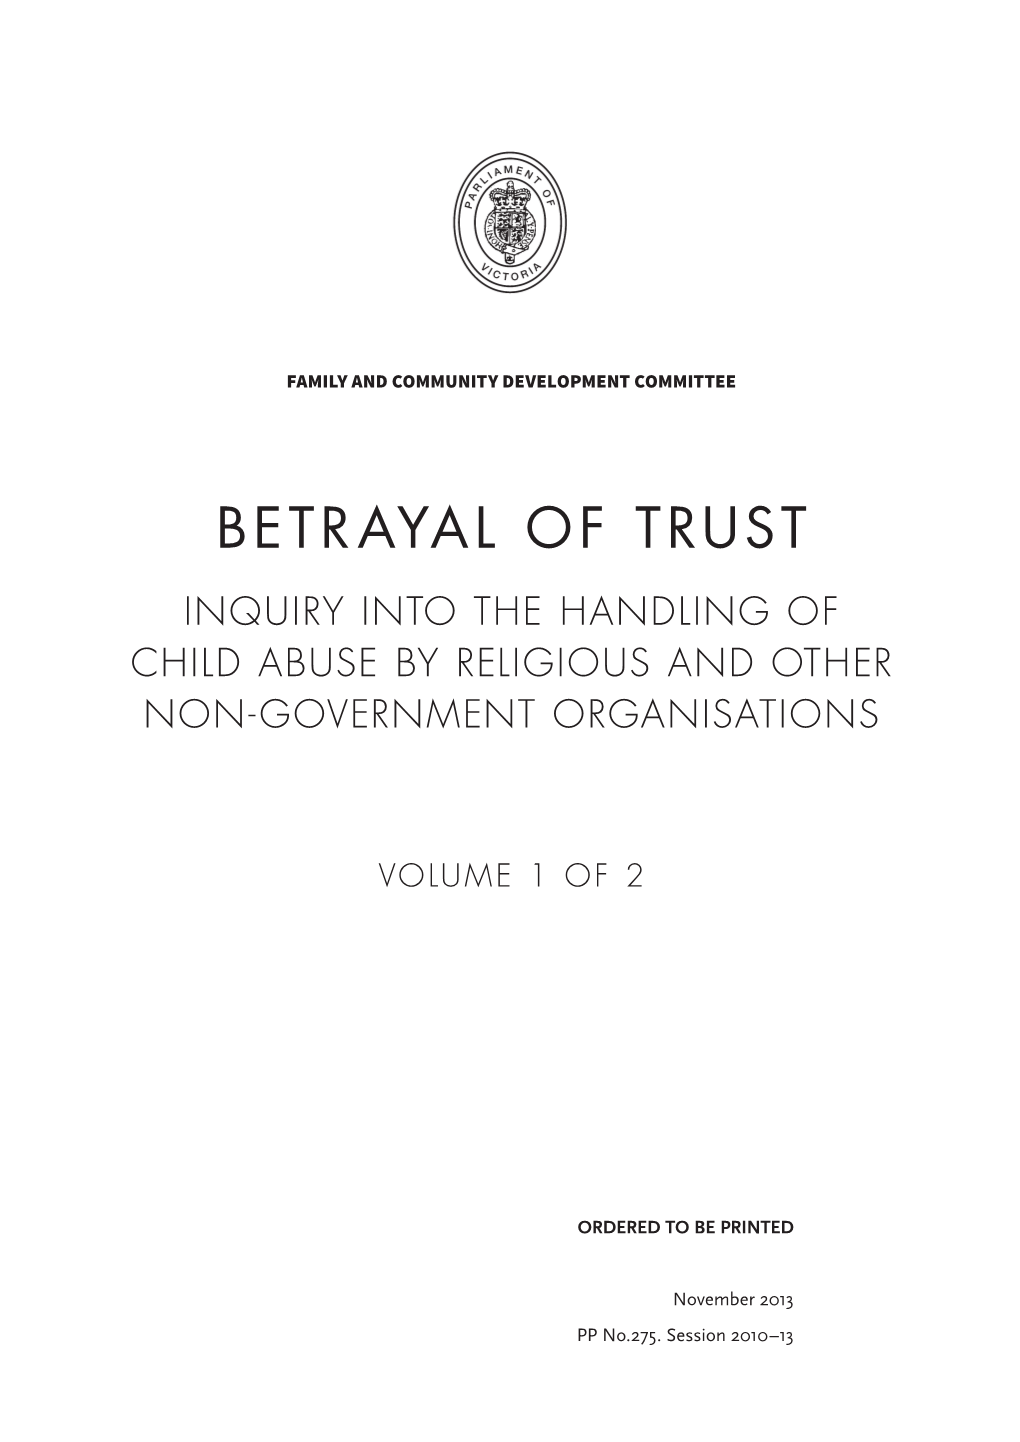 Betrayal of Trust Inquiry Into the Handling of Child Abuse by Religious and Other Non-Government Organisations